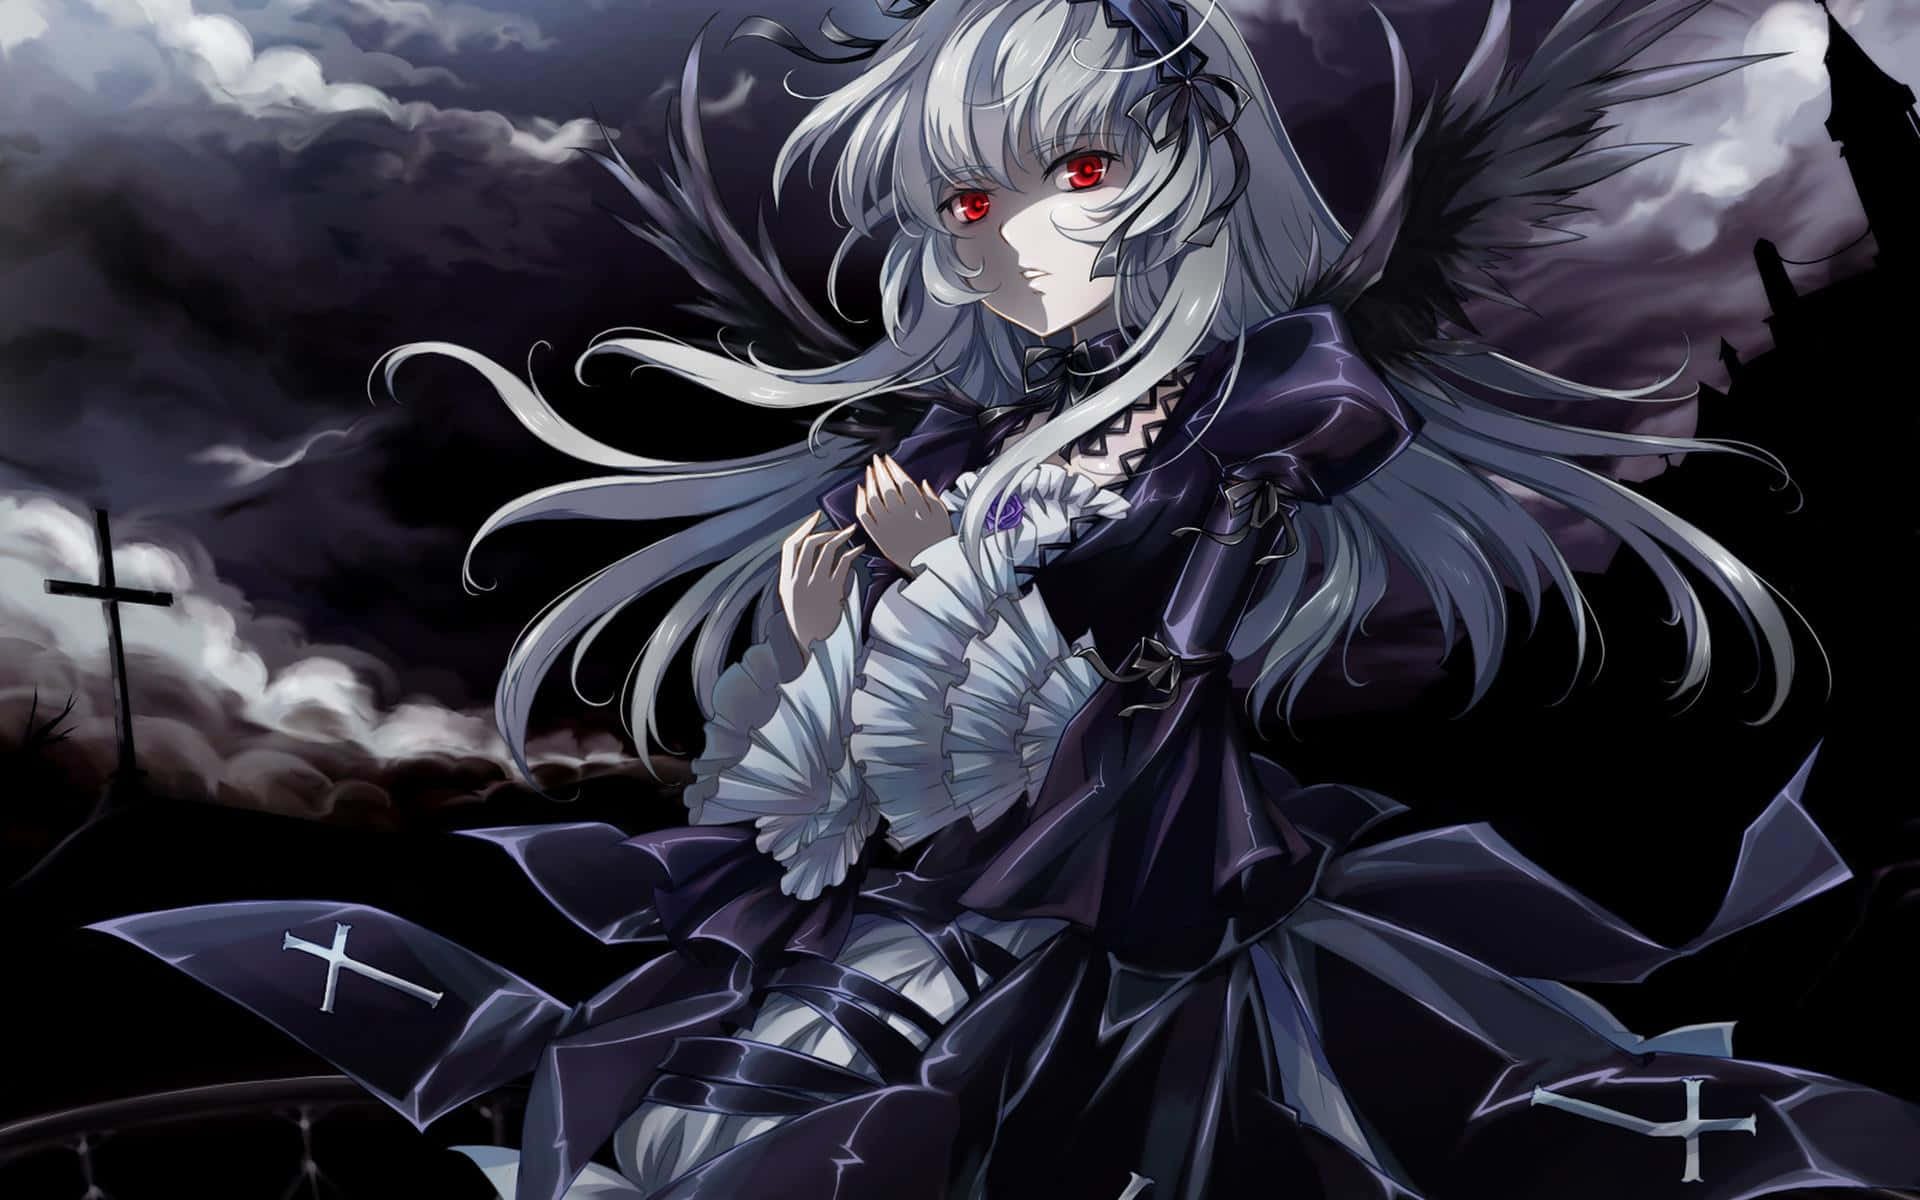 Enter a dark and magical new world with Gothic Anime. Wallpaper